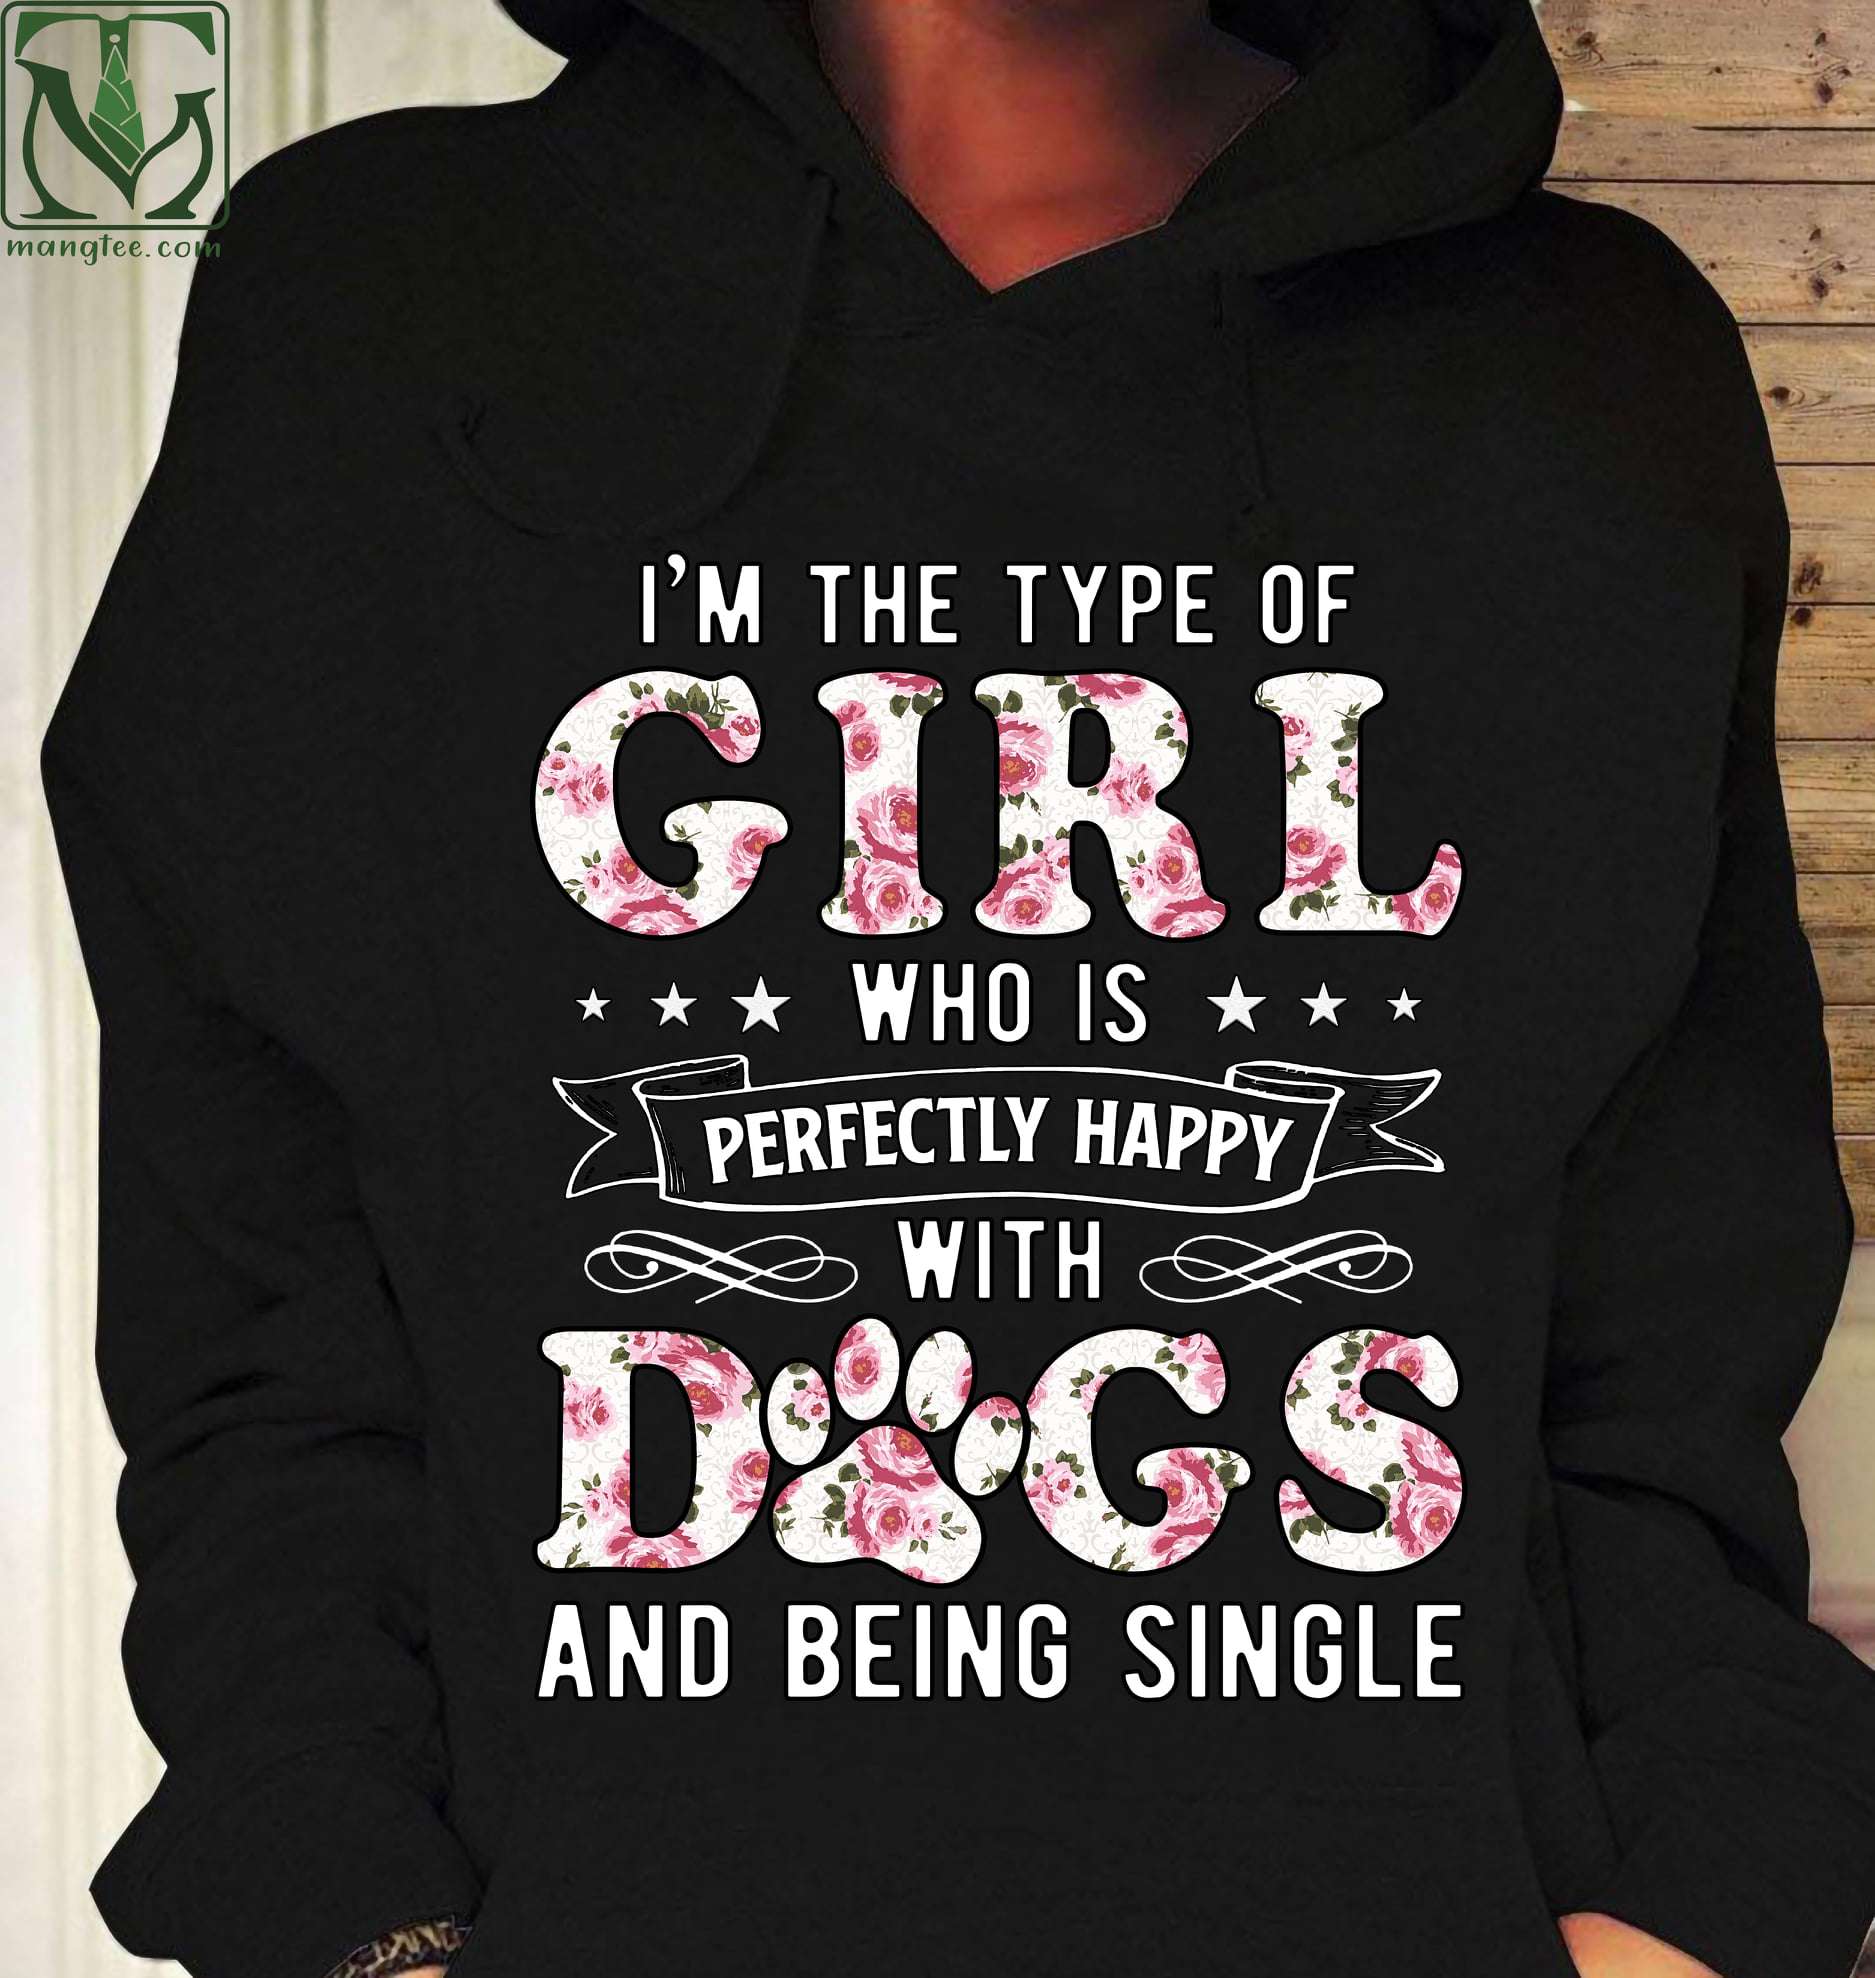 I'm the type of girl who is perfectly happy with dogs and being single - Single dog girl, girl loves dogs